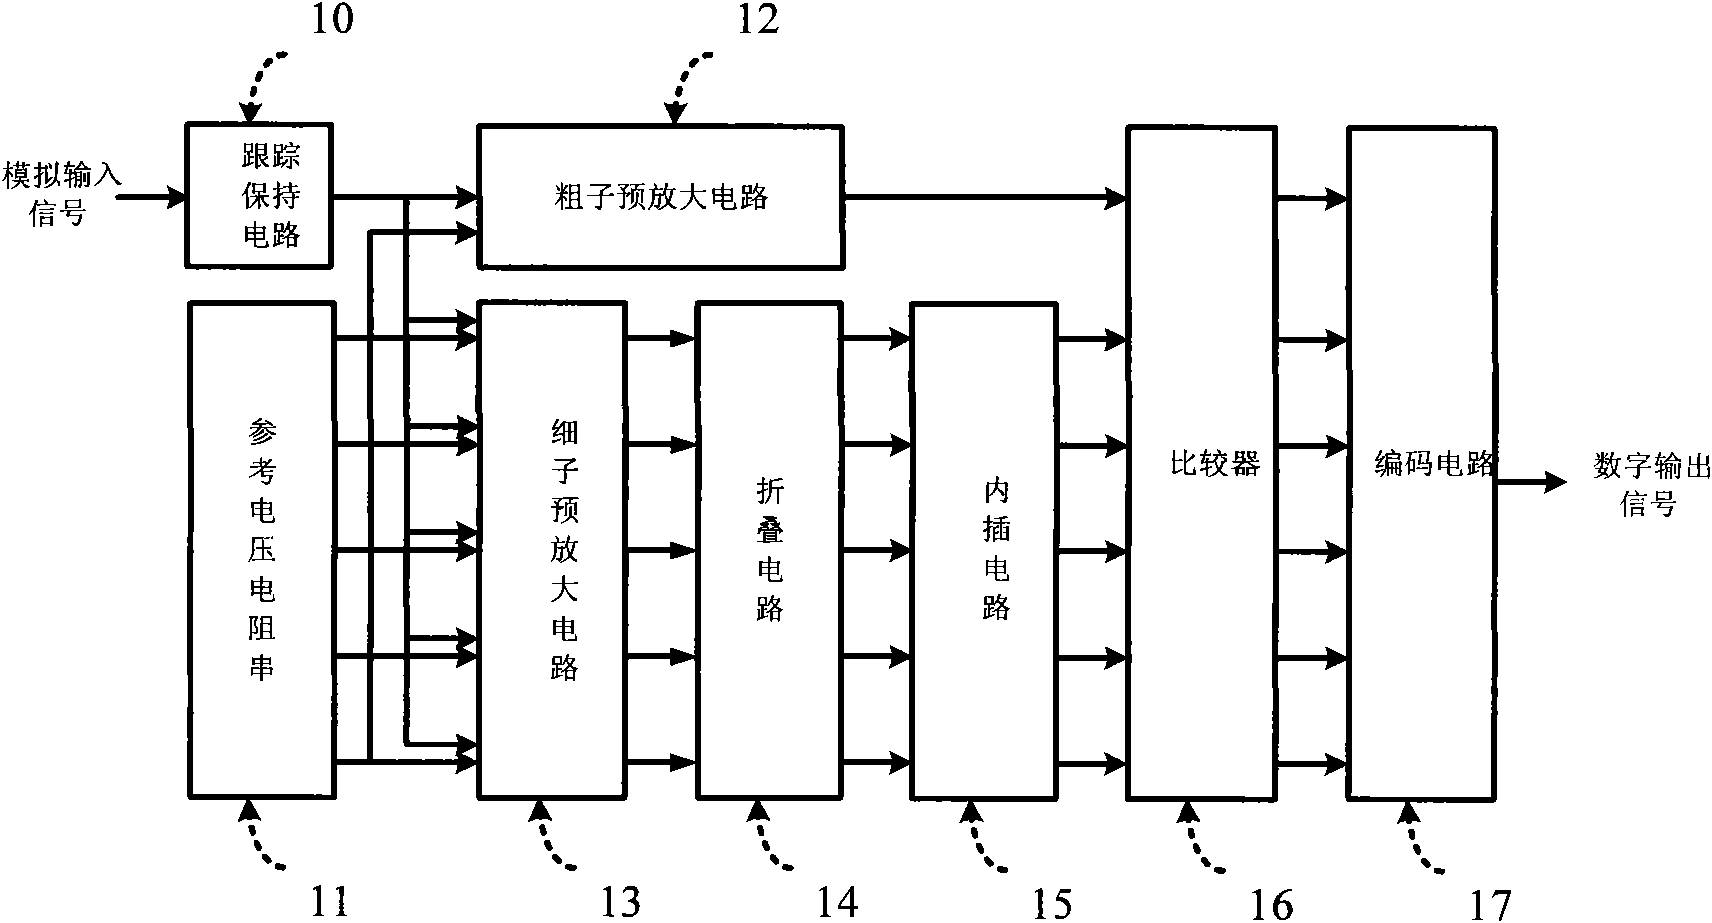 Low supply voltage pipelined folded interpolating analog-to-digital converter